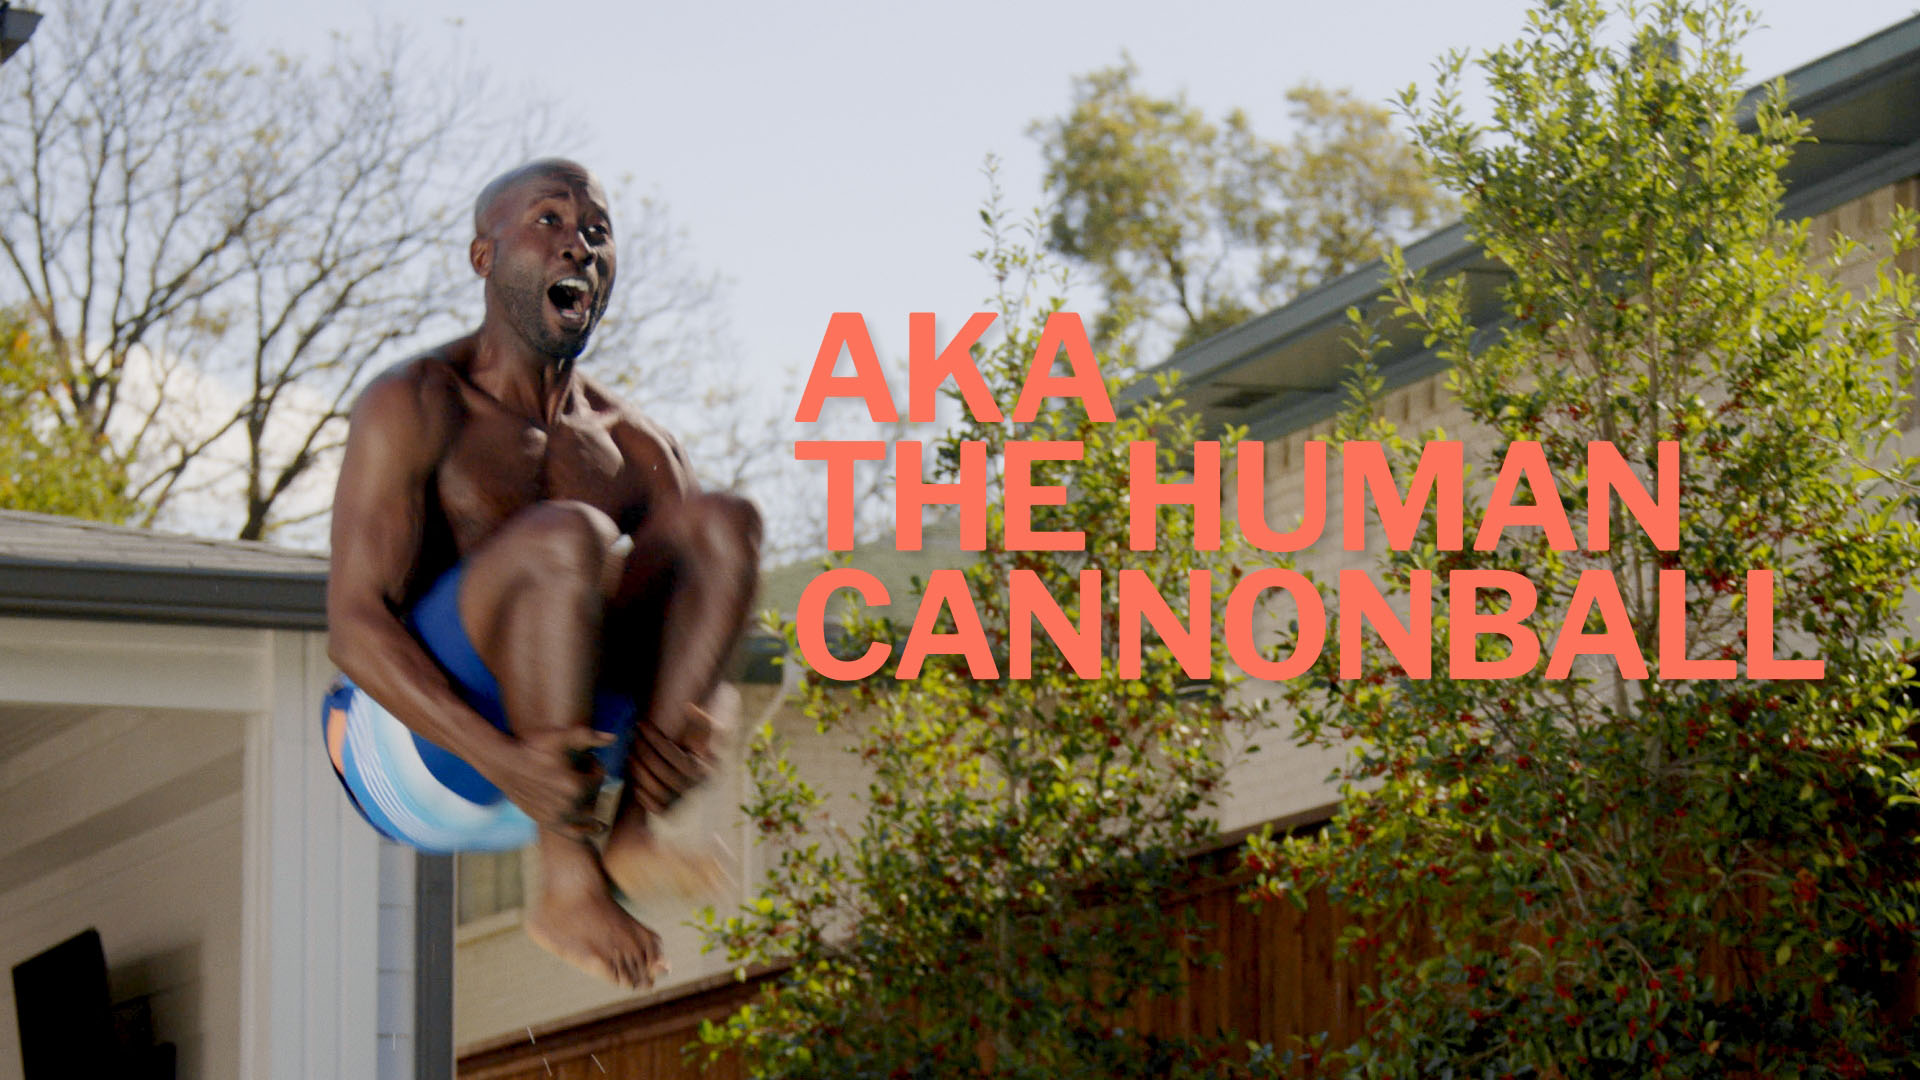 A man cannon-balling into the pool with the text "AKA the human cannonball."